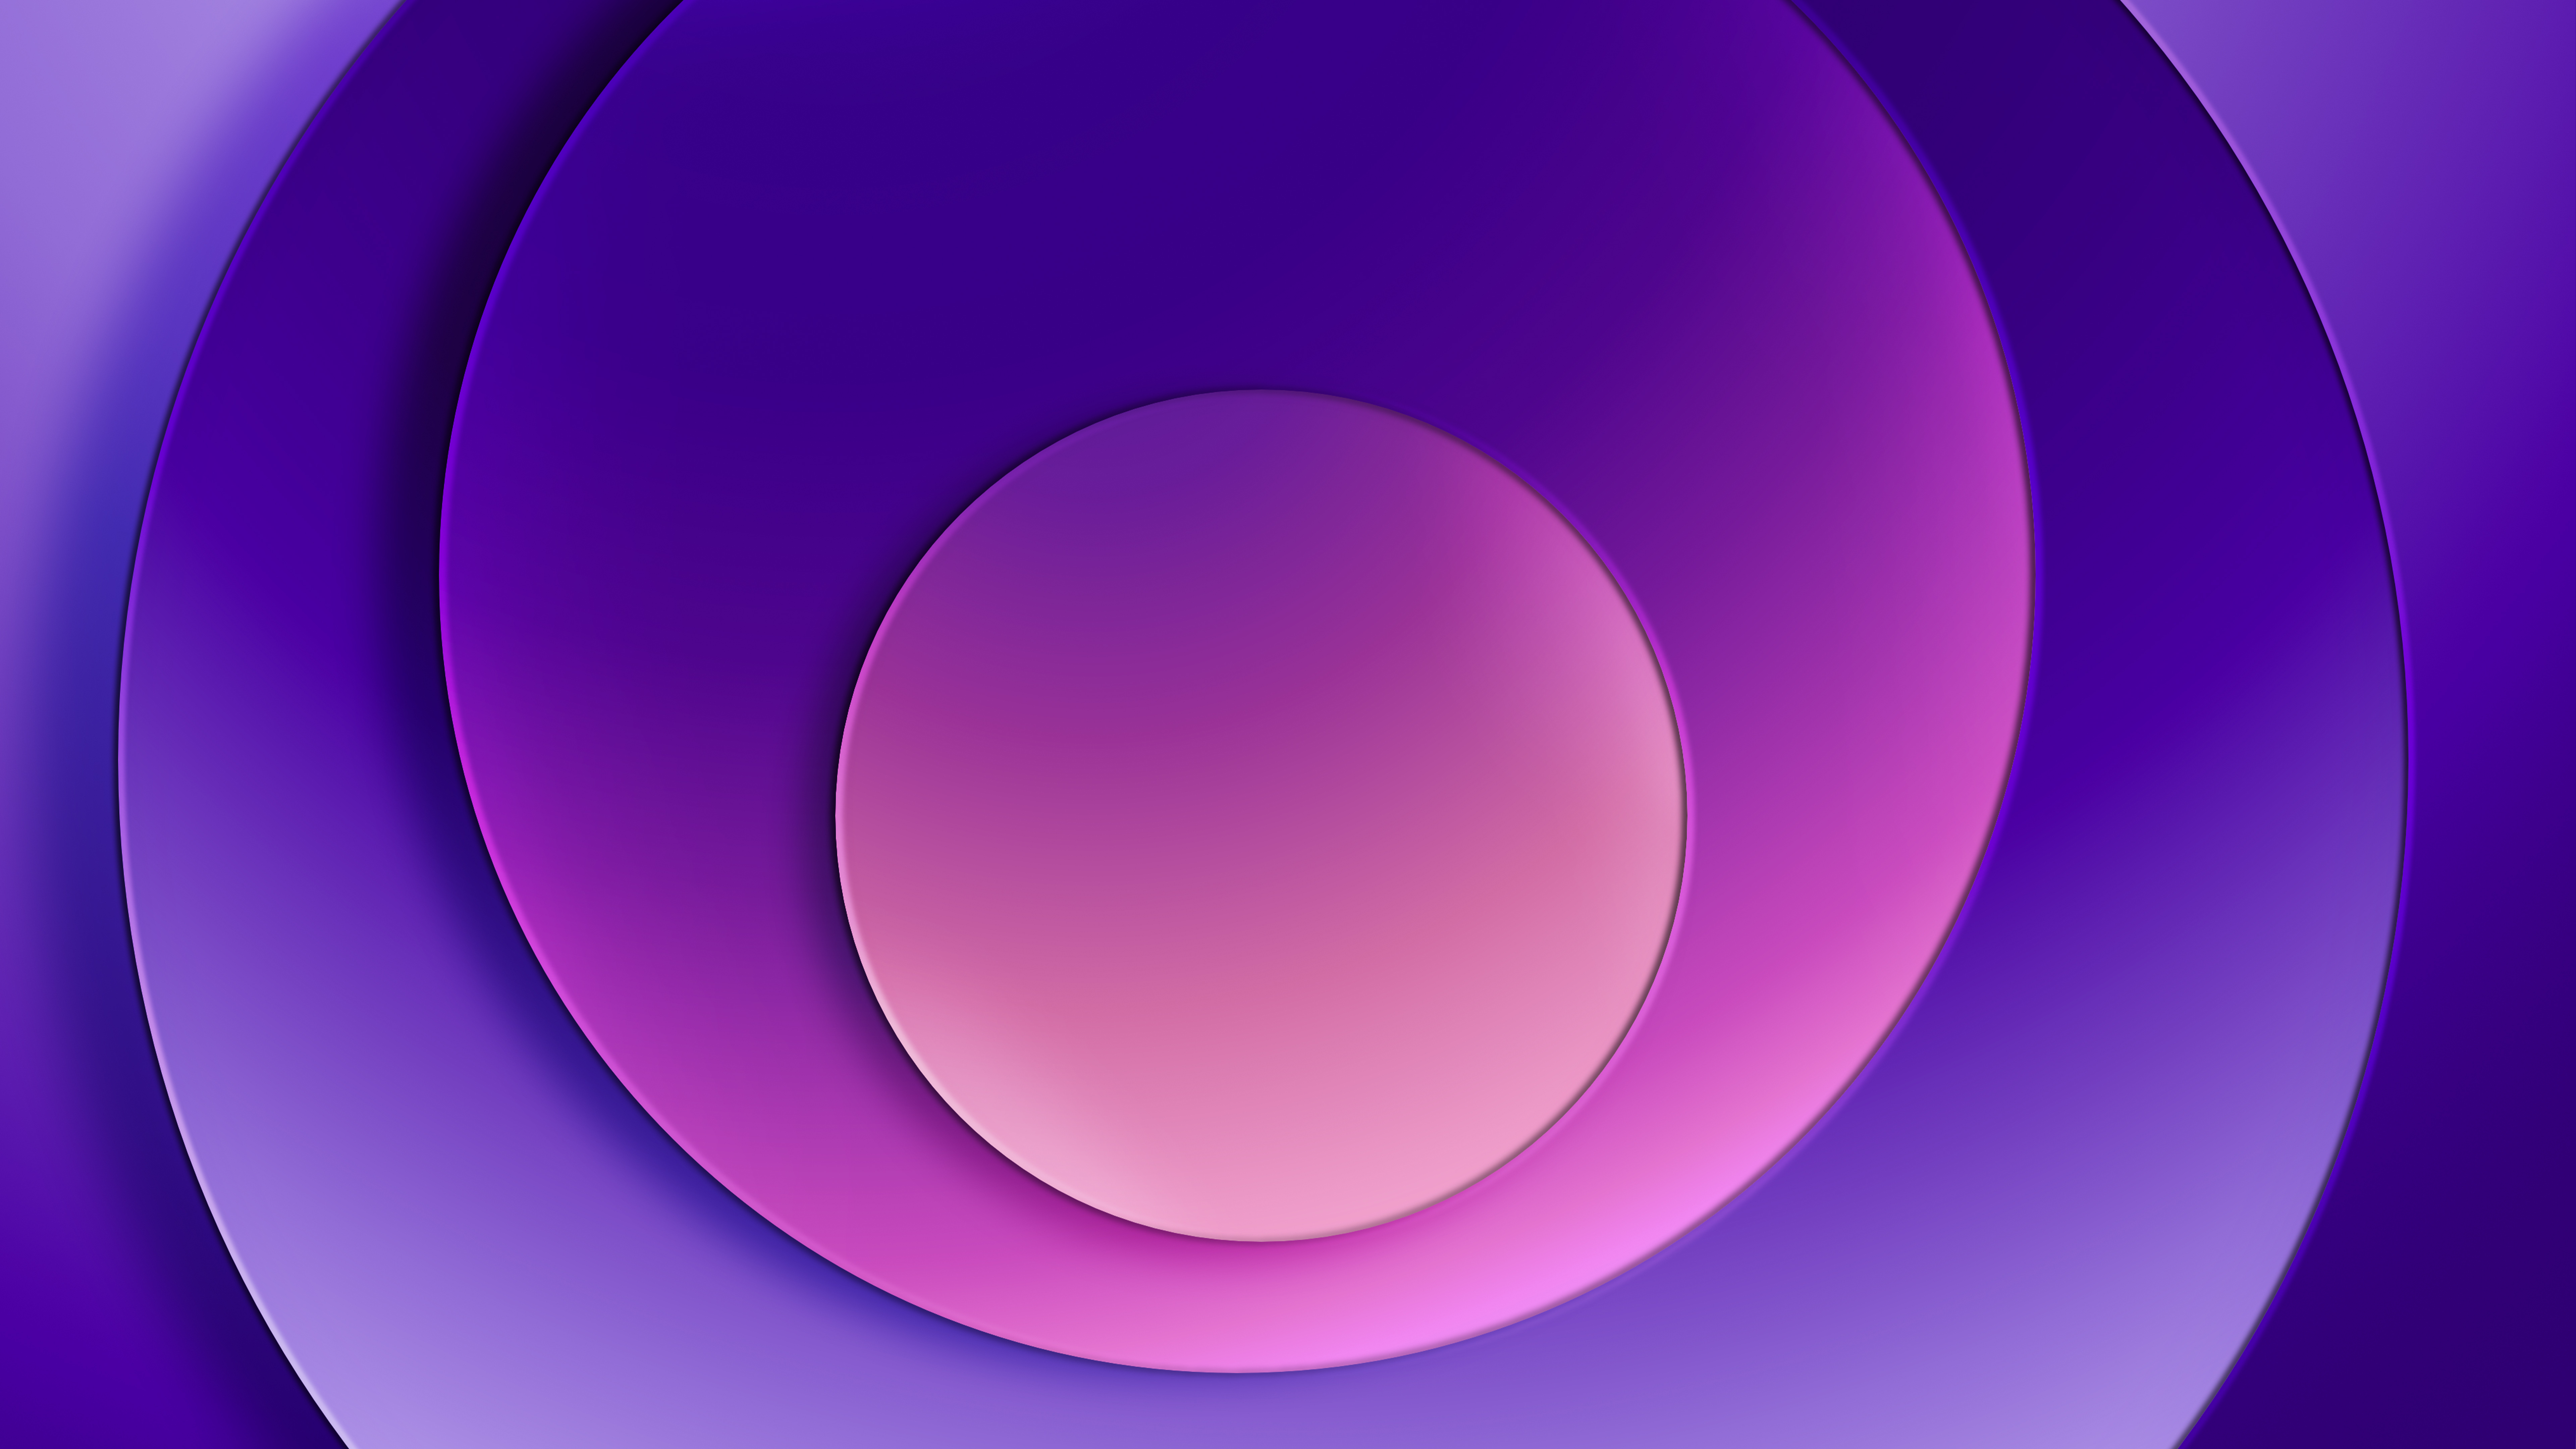 7680x4320 Iphone 12 Purple Stock 8k HD 4k Wallpapers, Images, Backgrounds,  Photos and Pictures